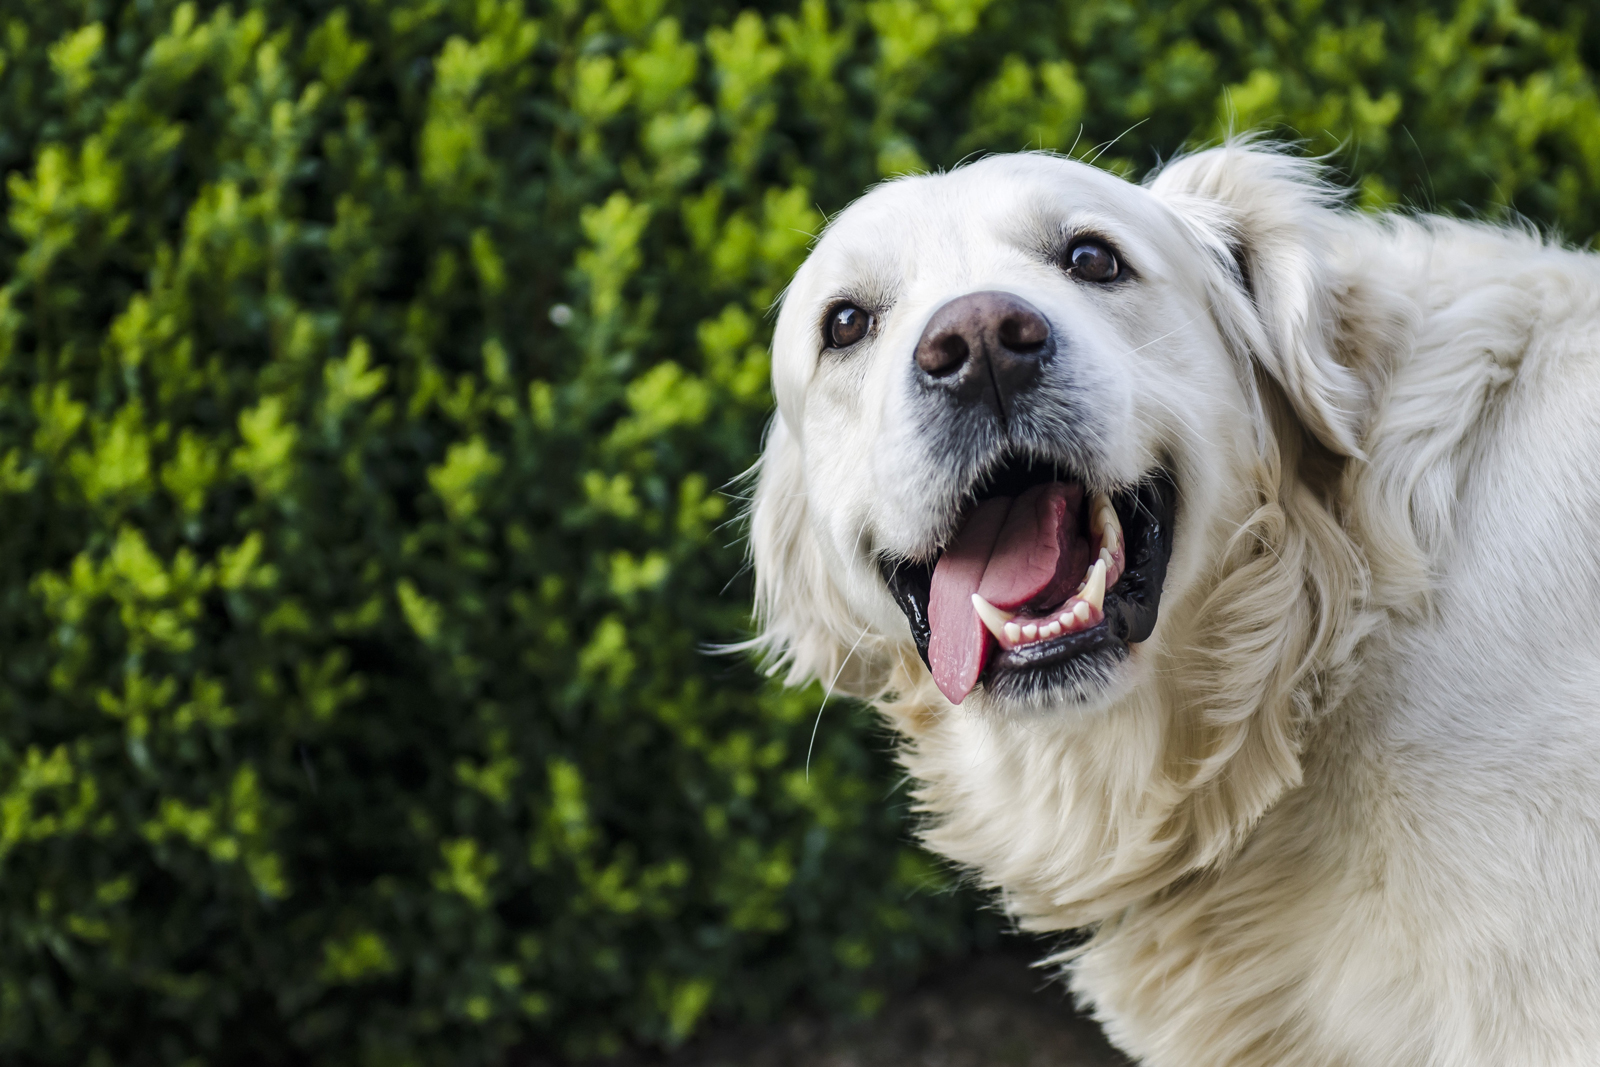 A dog with its tongue hanging out looking happy in-front of a bush